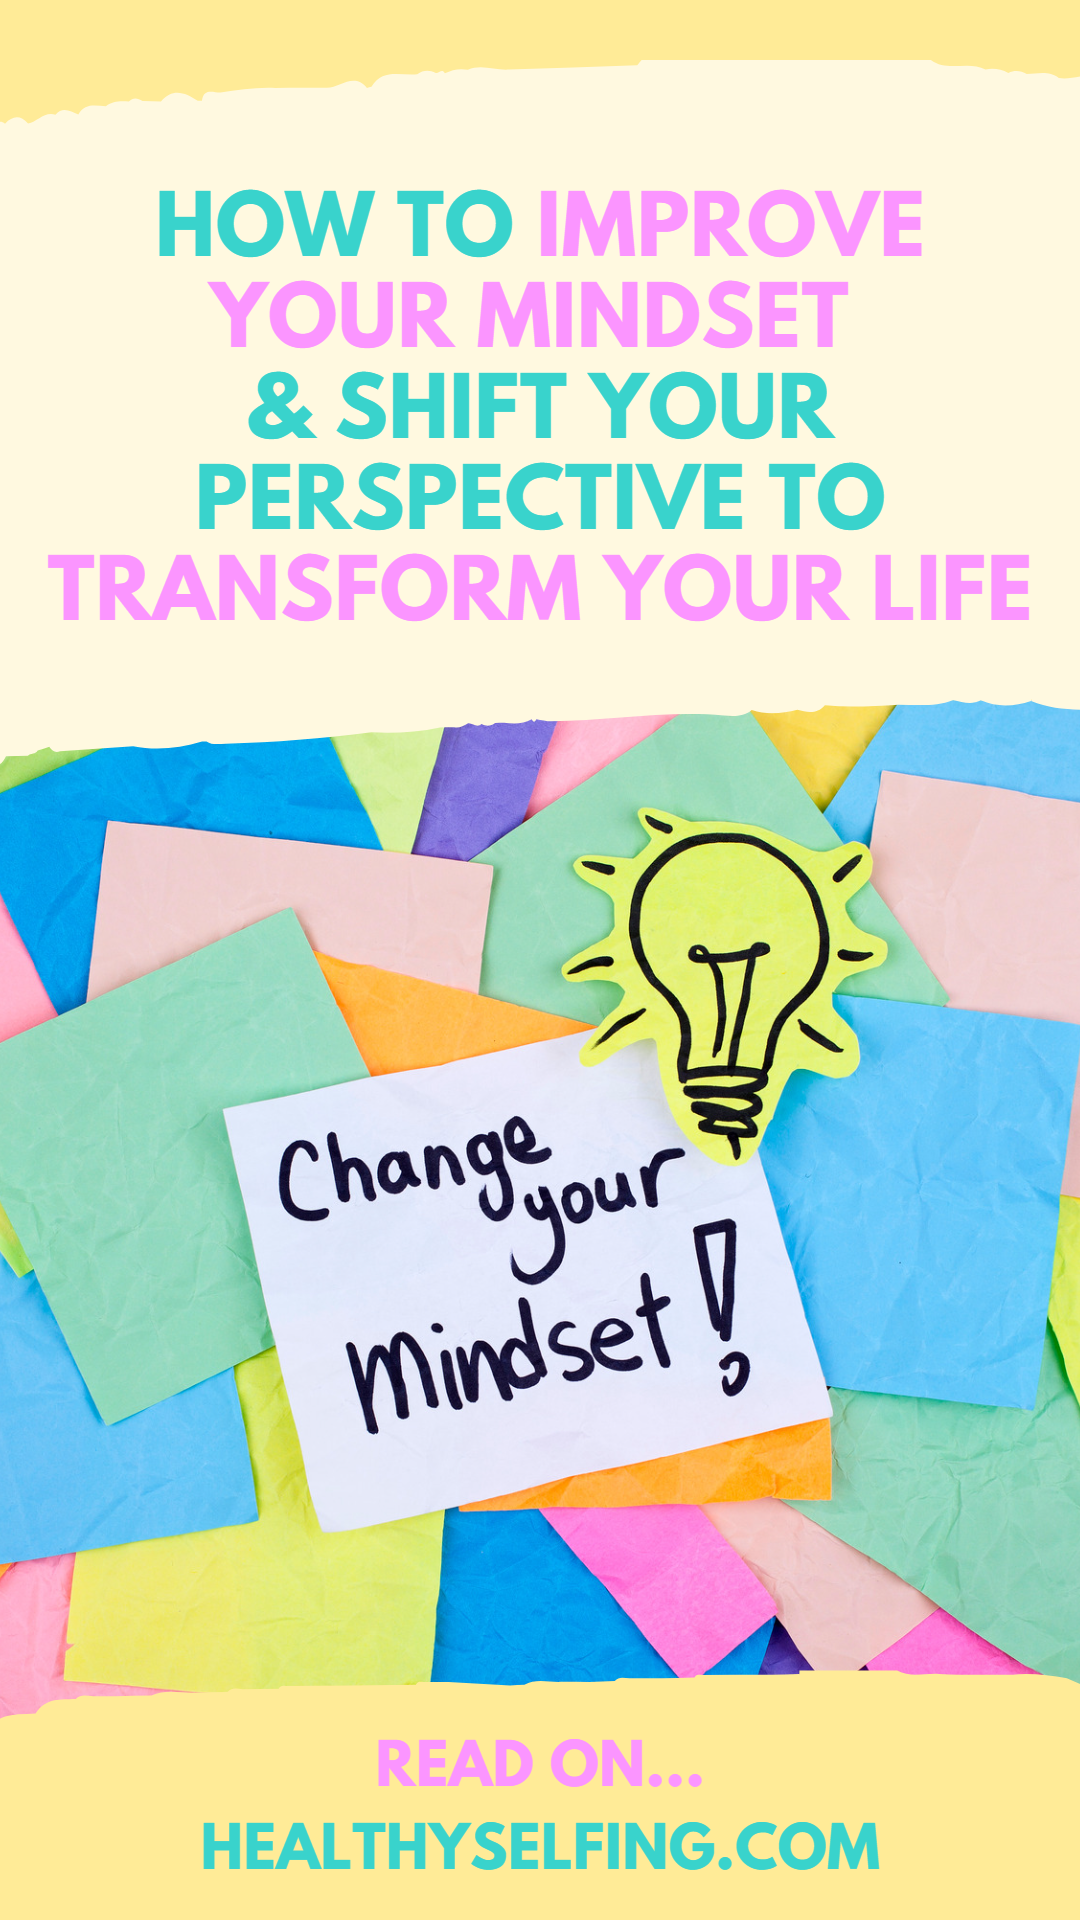 How to Improve Your Mindset and Shift Your Perspective to Transform Your Life